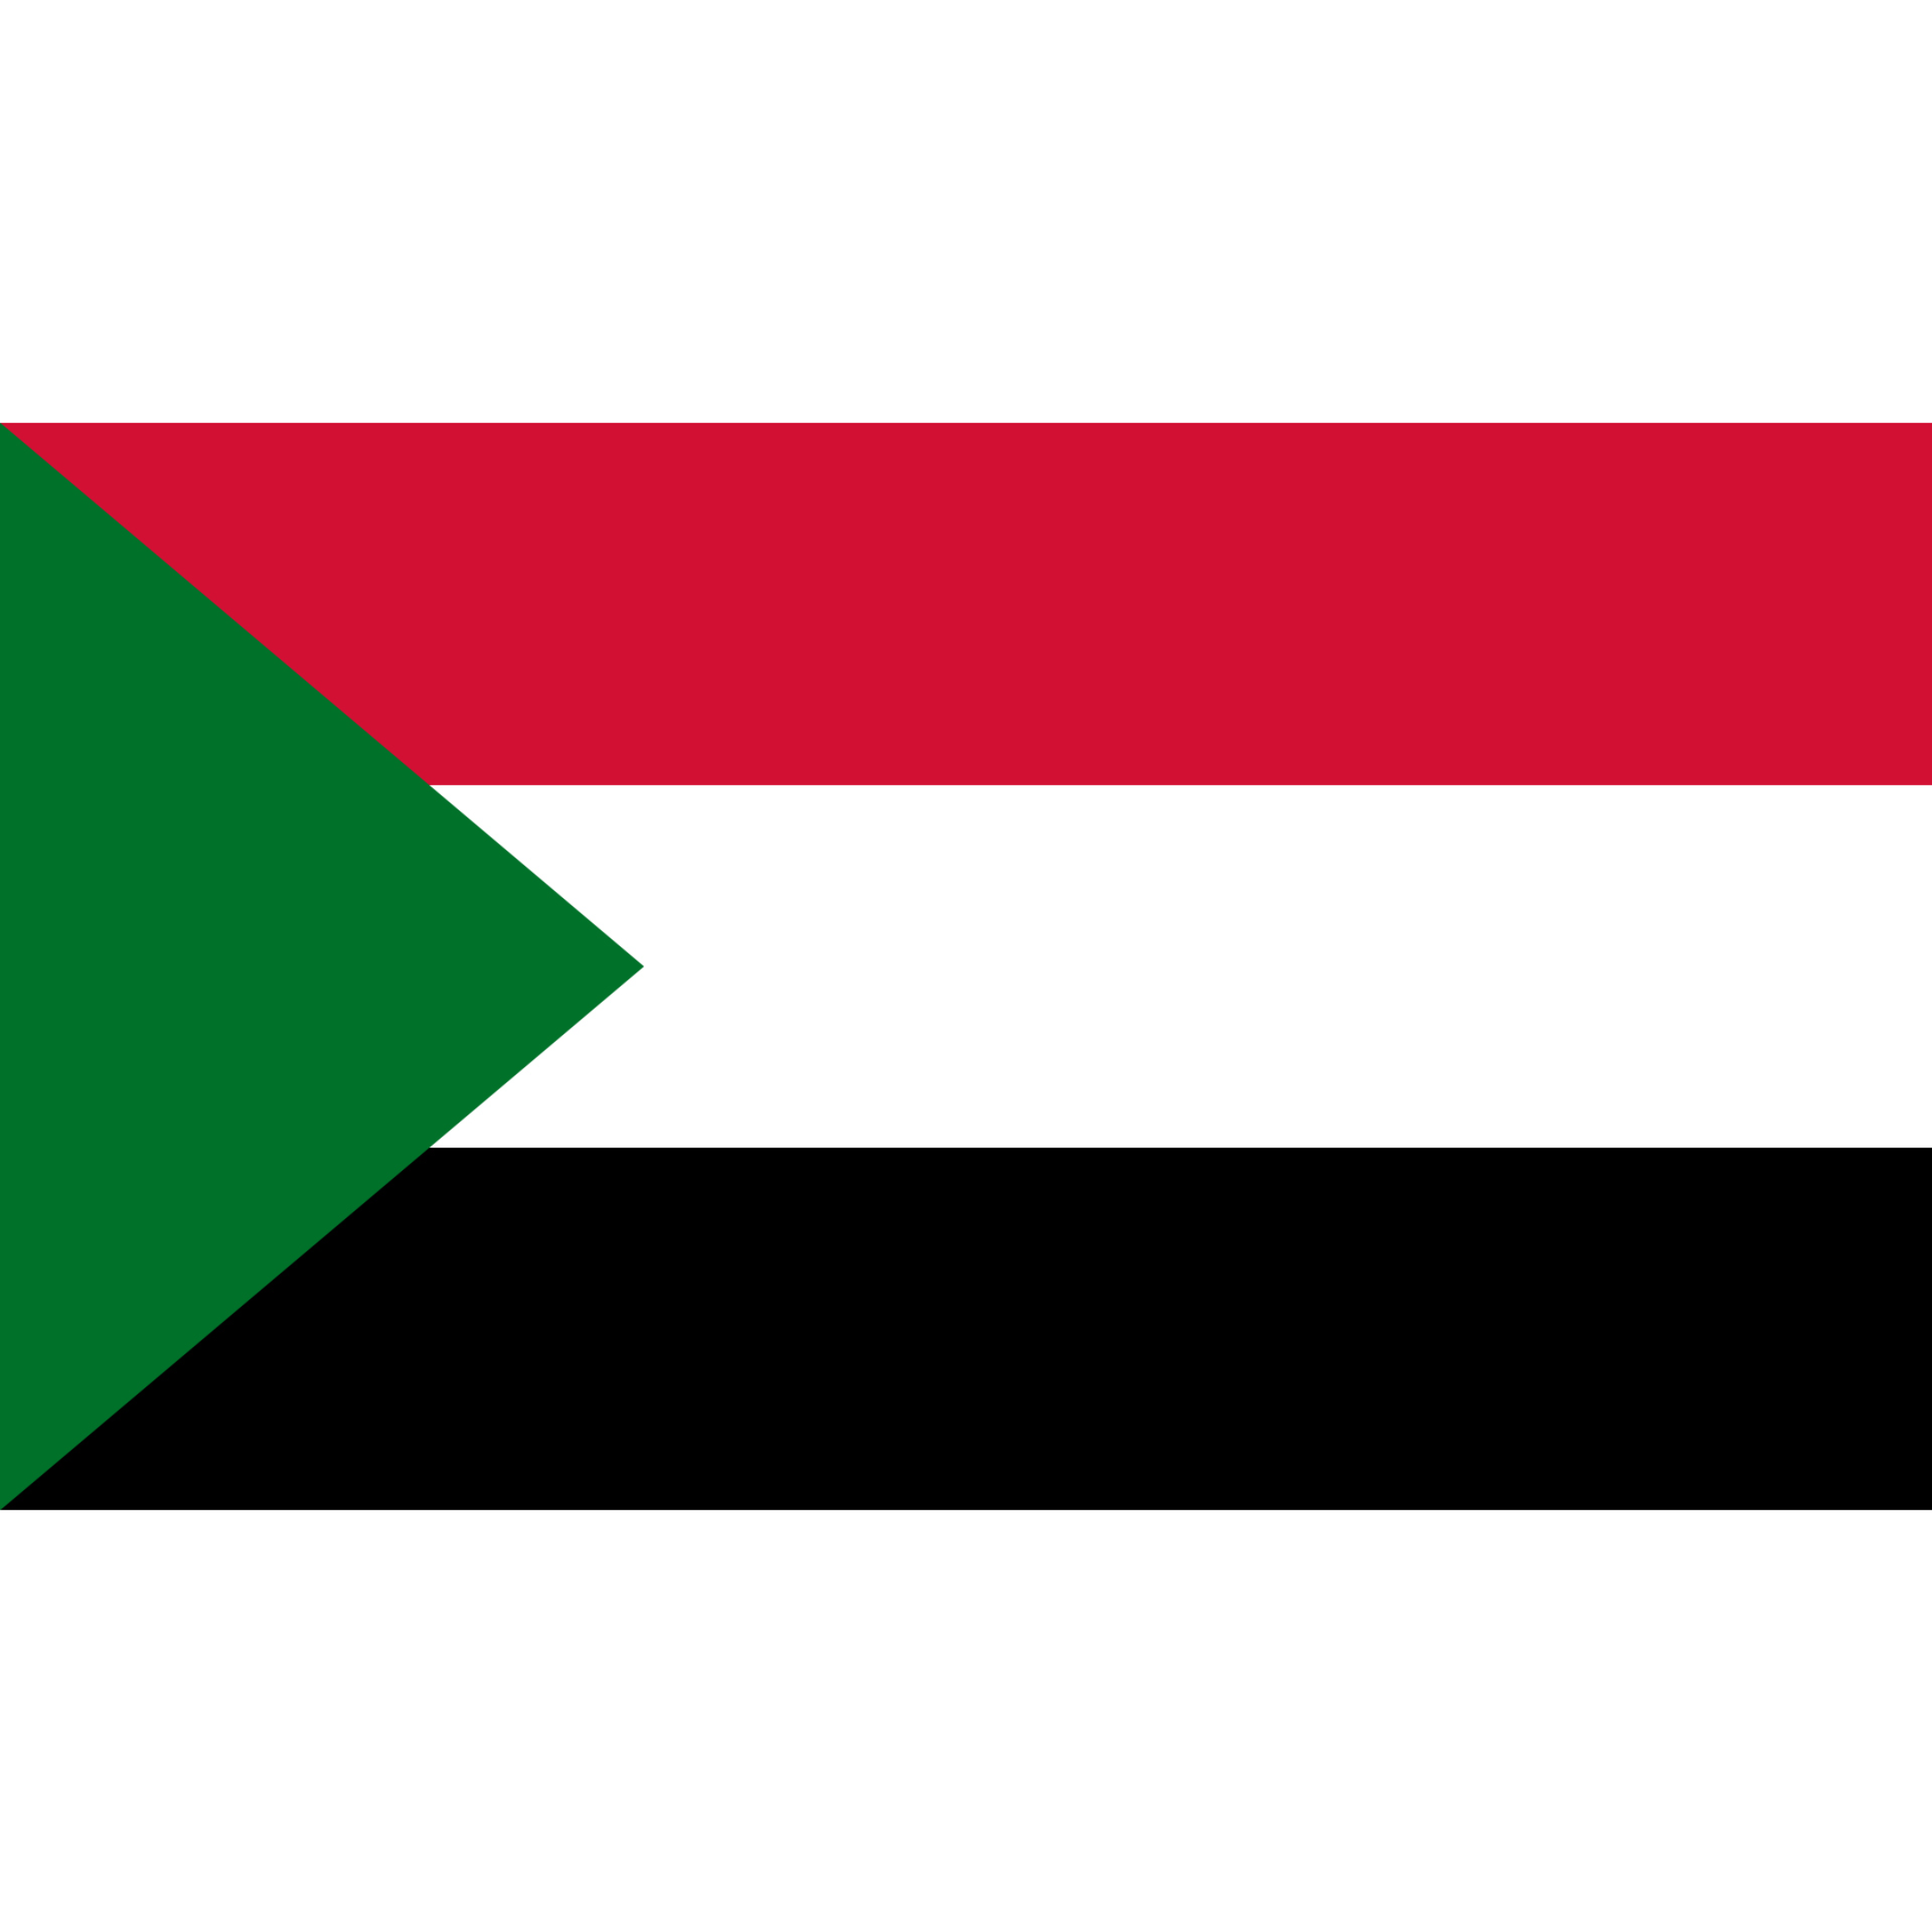 The flag of Sudan has three horizontal bands in red, white and black with a green triangle on the left side.